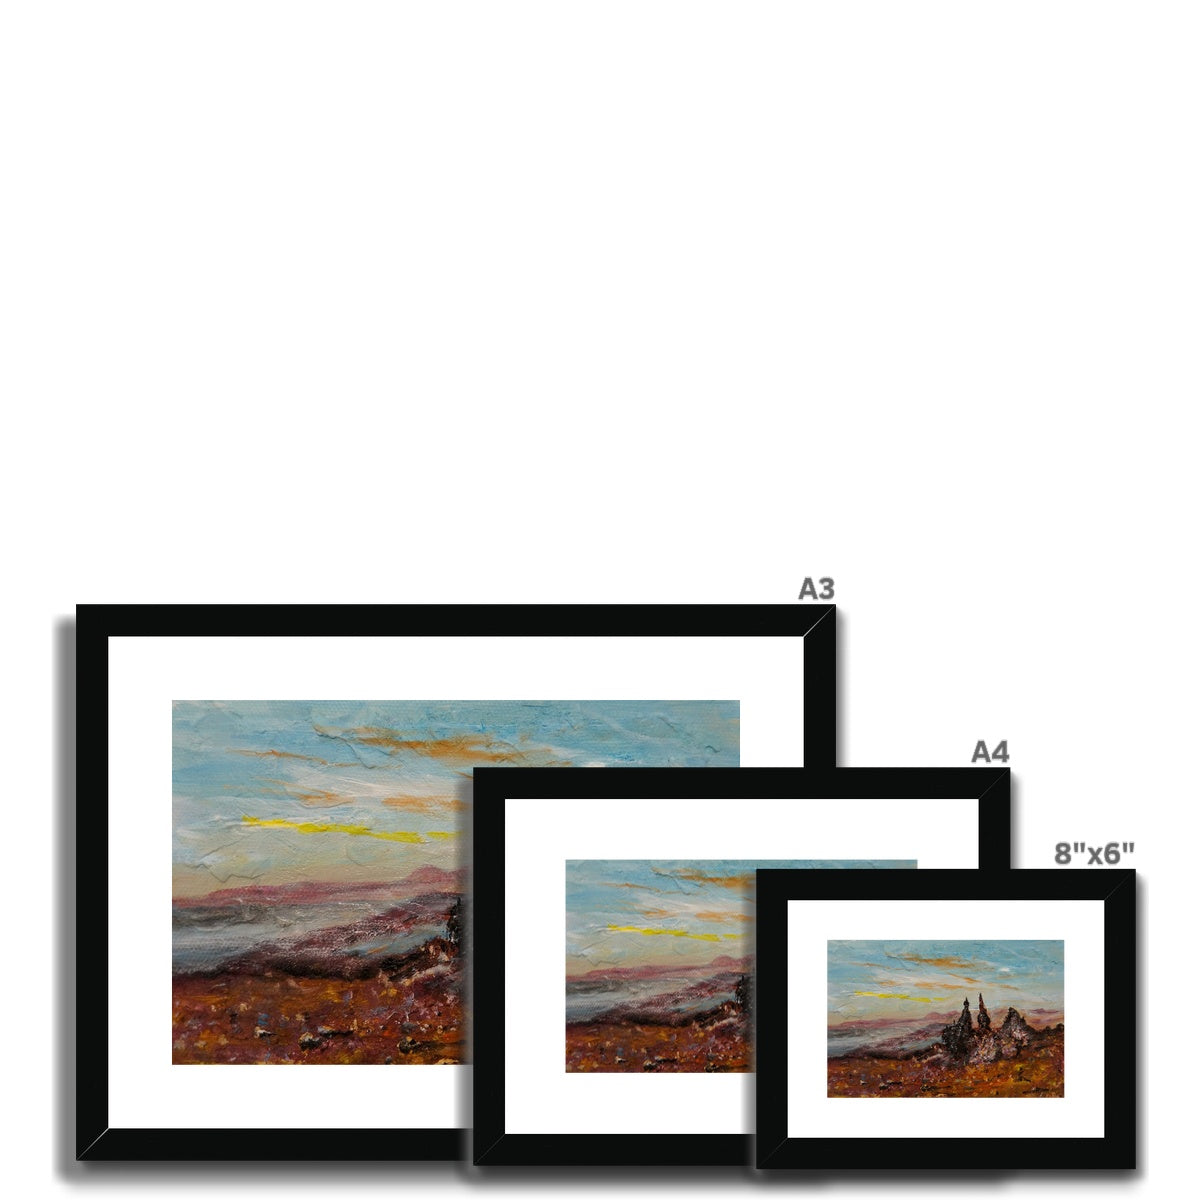 The Storr Skye Painting | Framed & Mounted Prints From Scotland-Framed & Mounted Prints-Skye Art Gallery-Paintings, Prints, Homeware, Art Gifts From Scotland By Scottish Artist Kevin Hunter